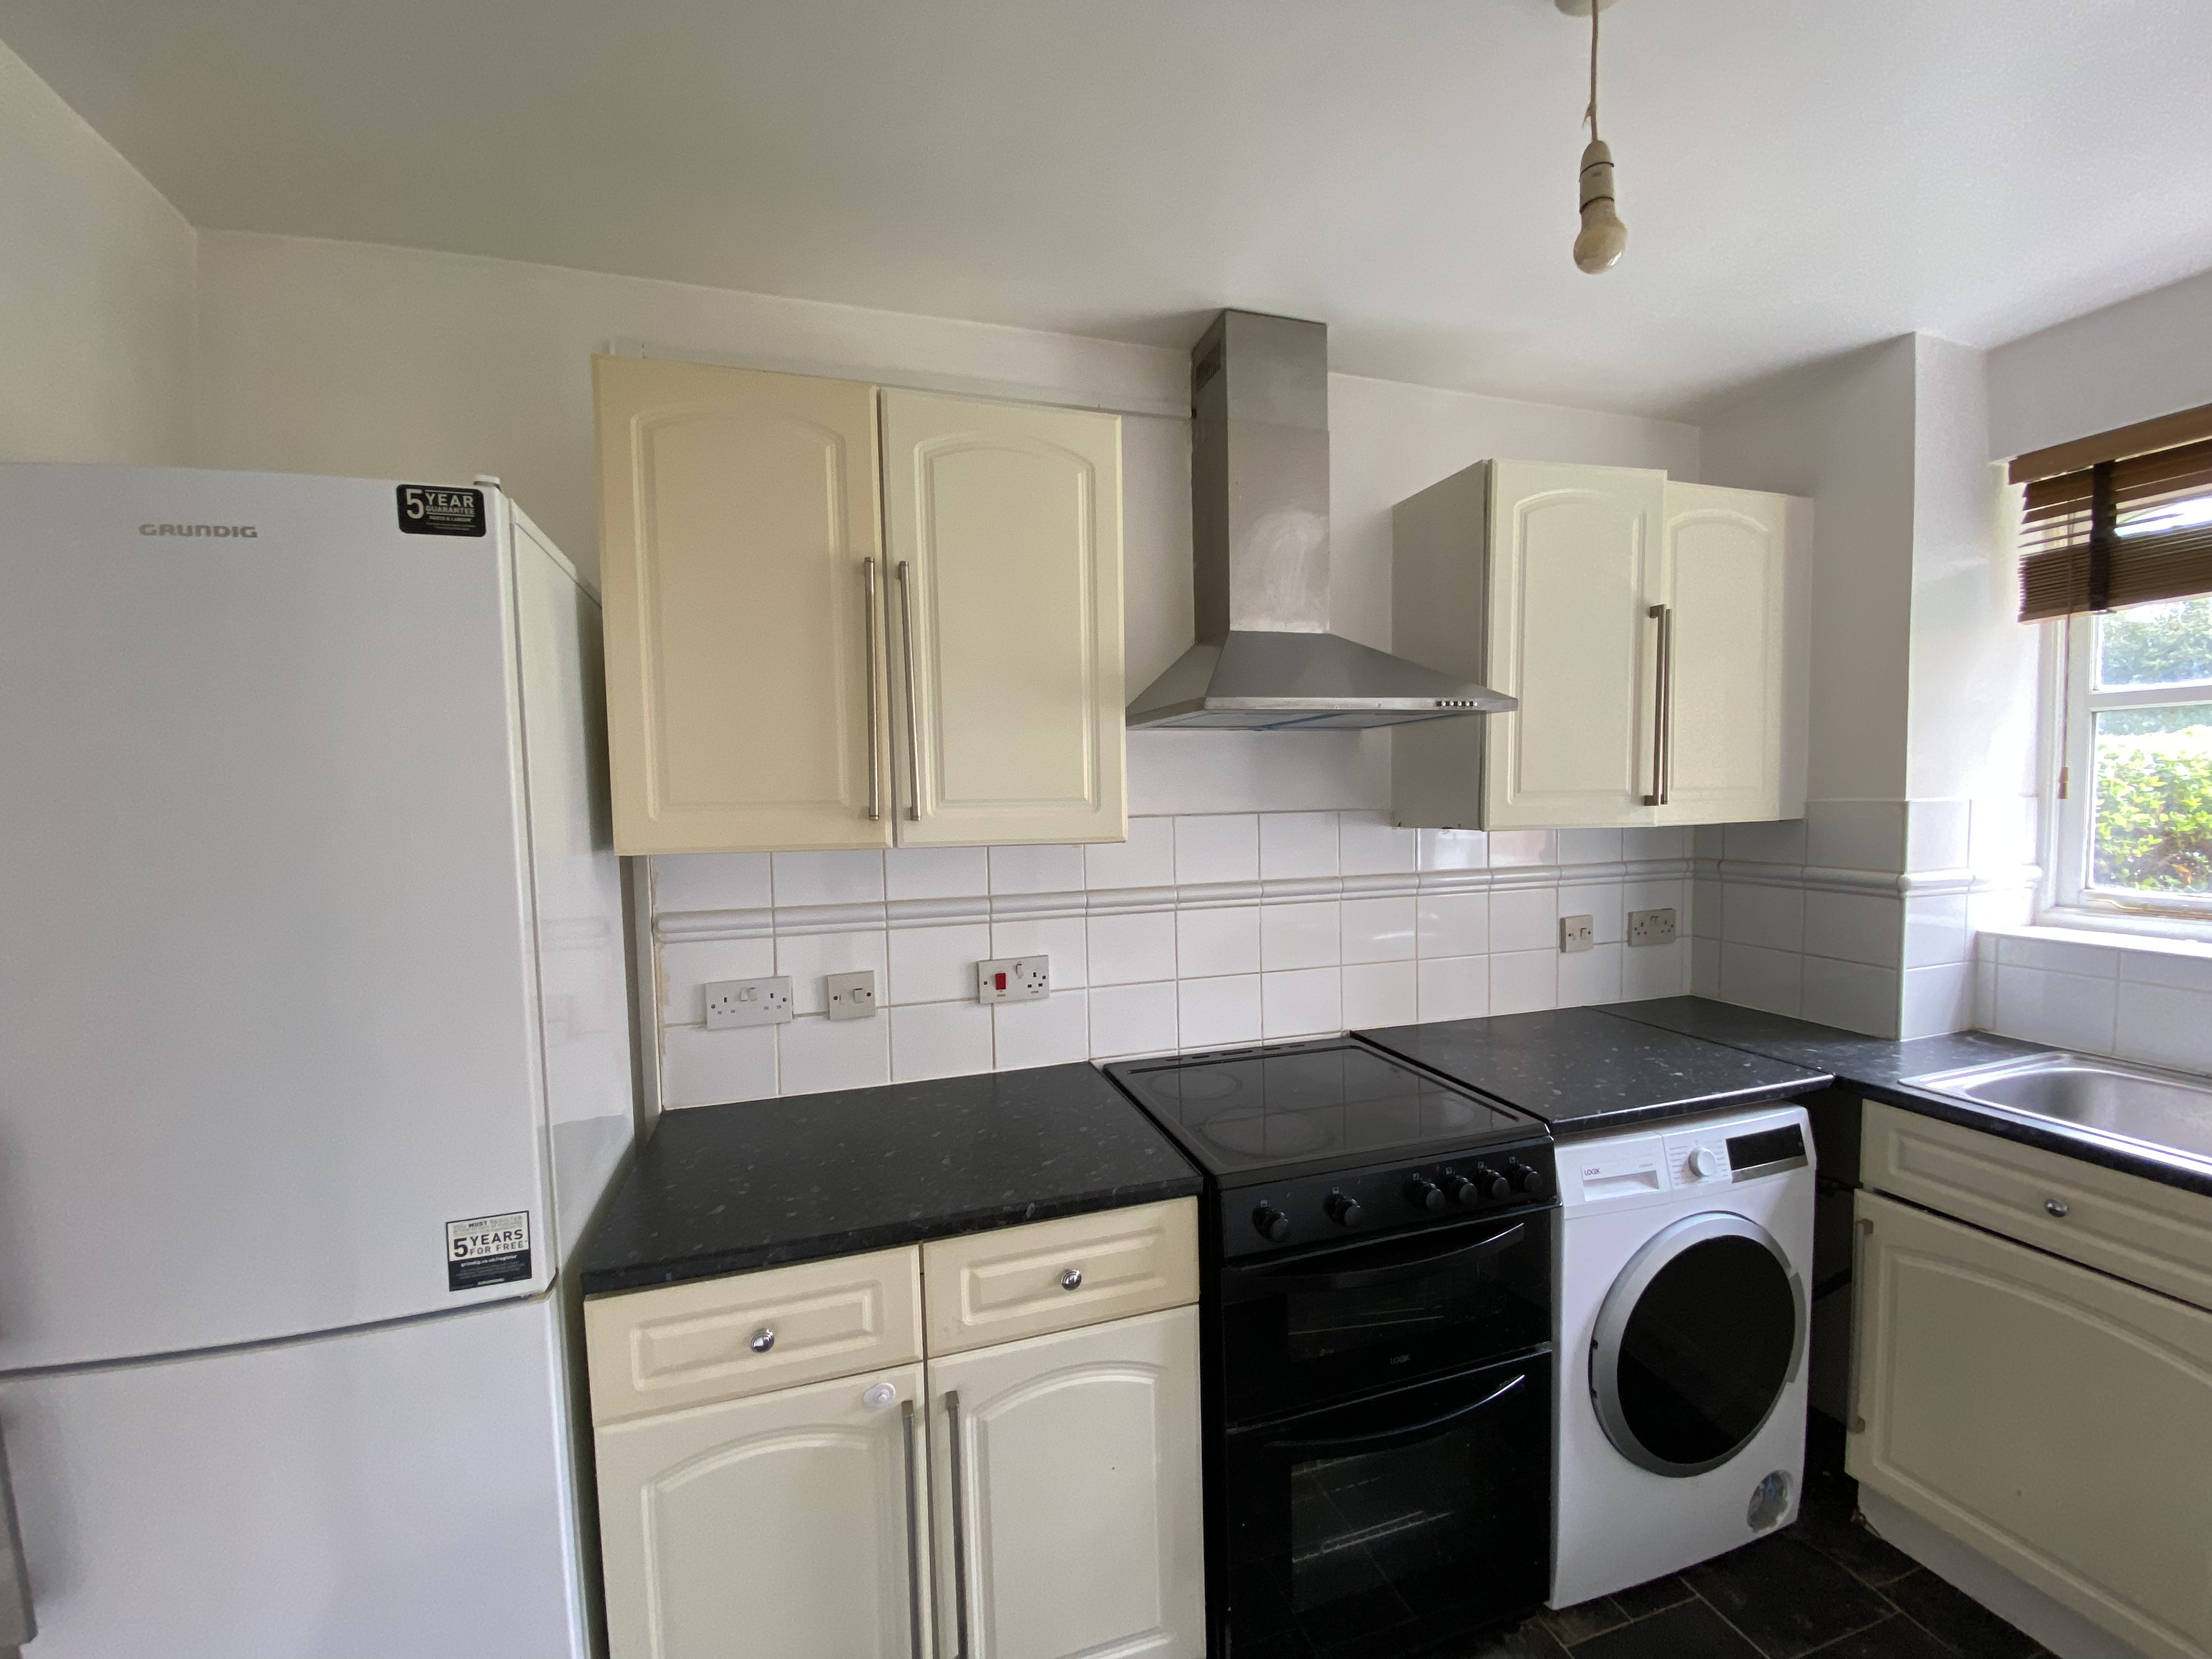 1 bedroom flat in NW2 - AVAILABLE NOW (ref. 2 W/D)